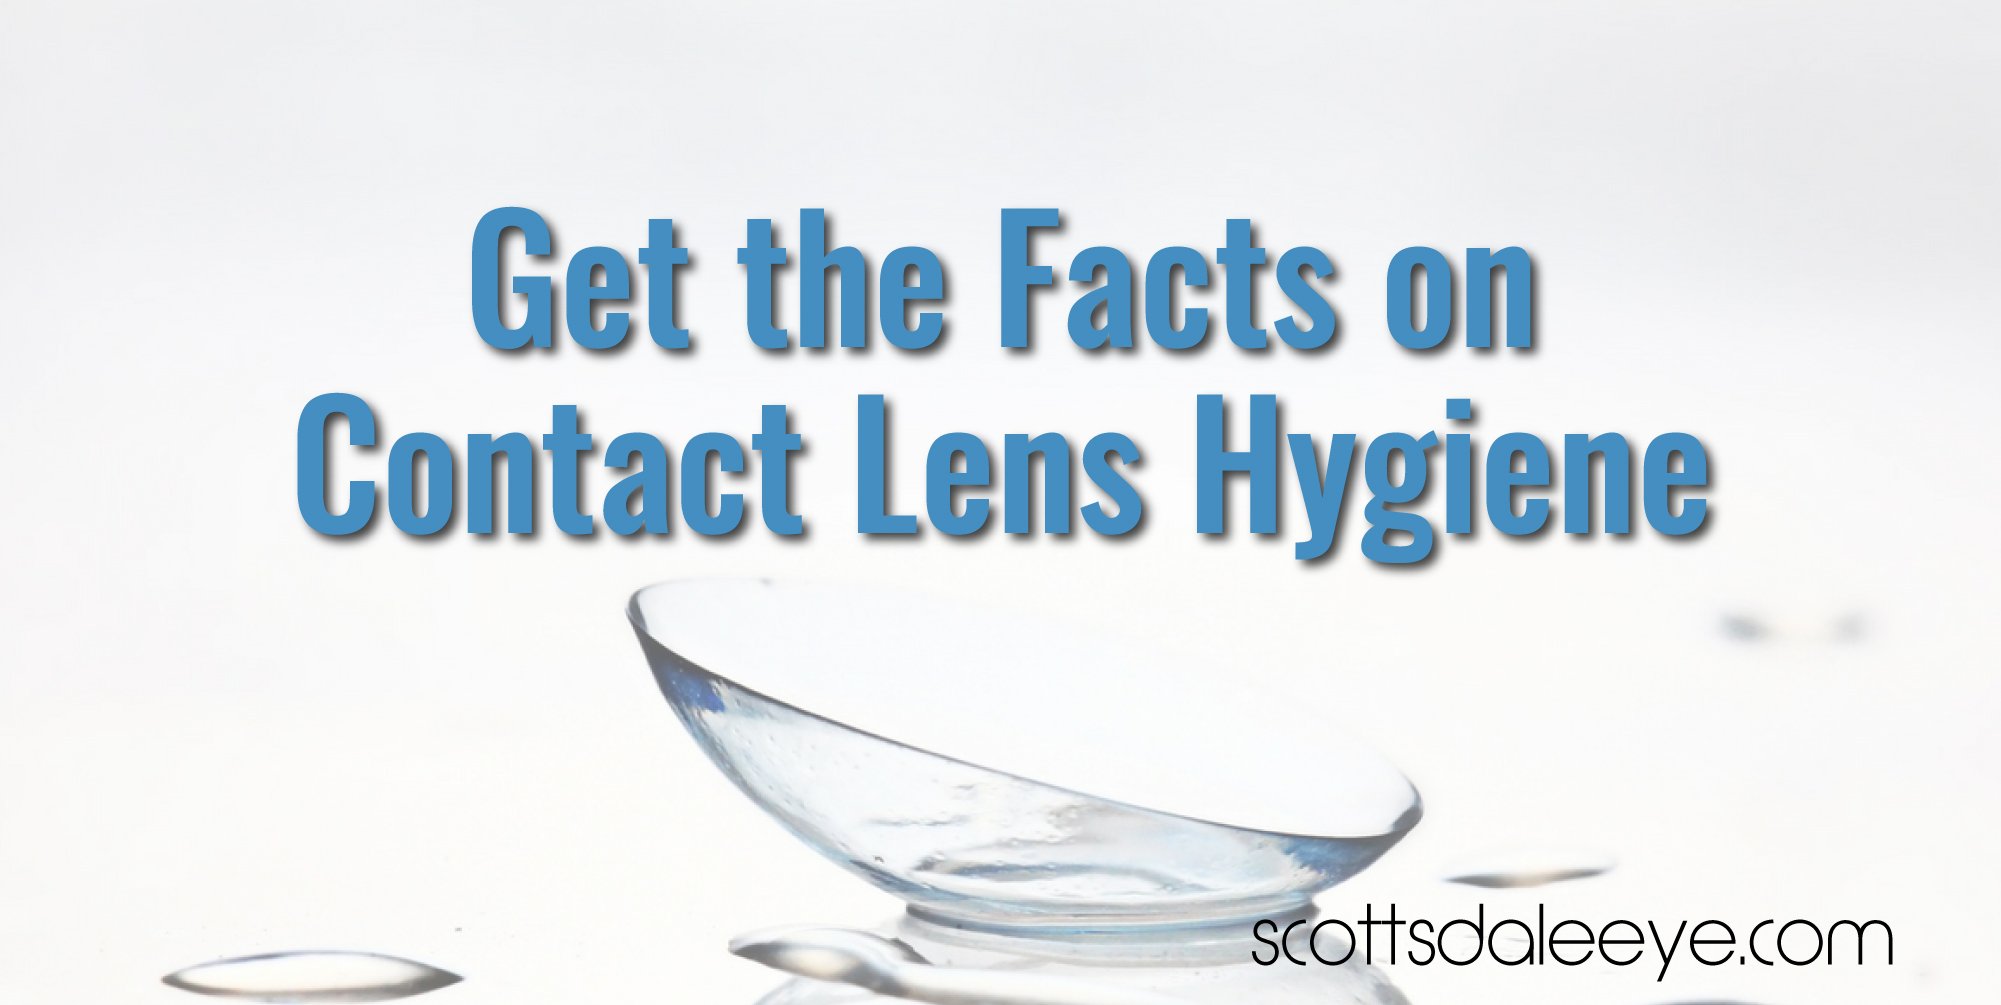 Get the Facts on Contact Lens Hygiene